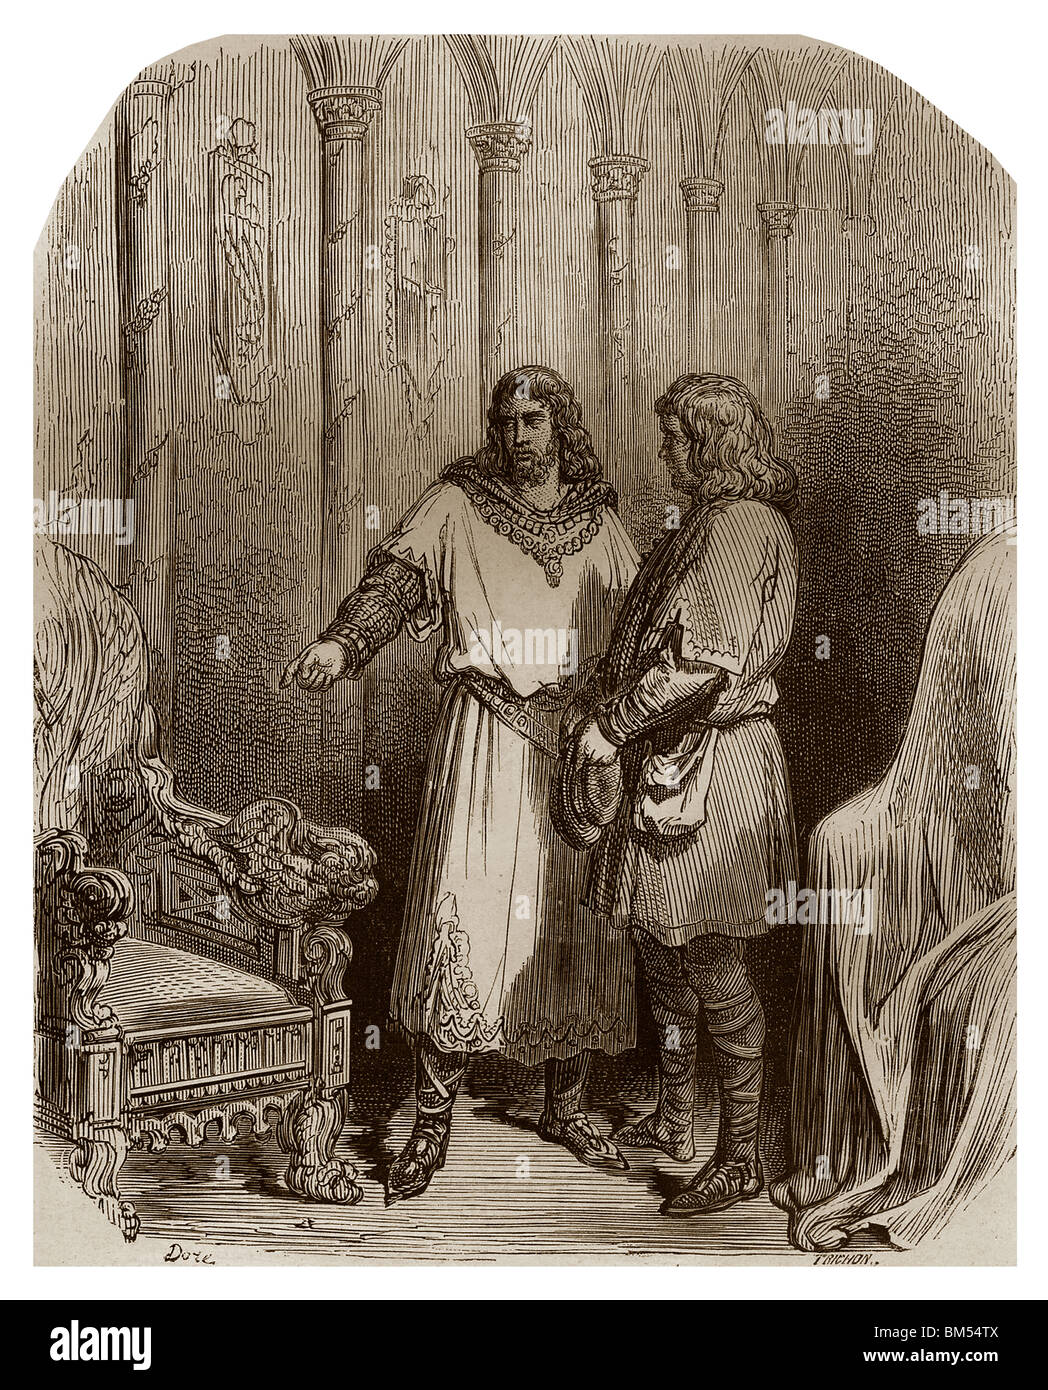 Chlothar II and Saint Eligius, goldsmith who was distinguished by Chlothar II for which he made two wonderful thrones. Stock Photo